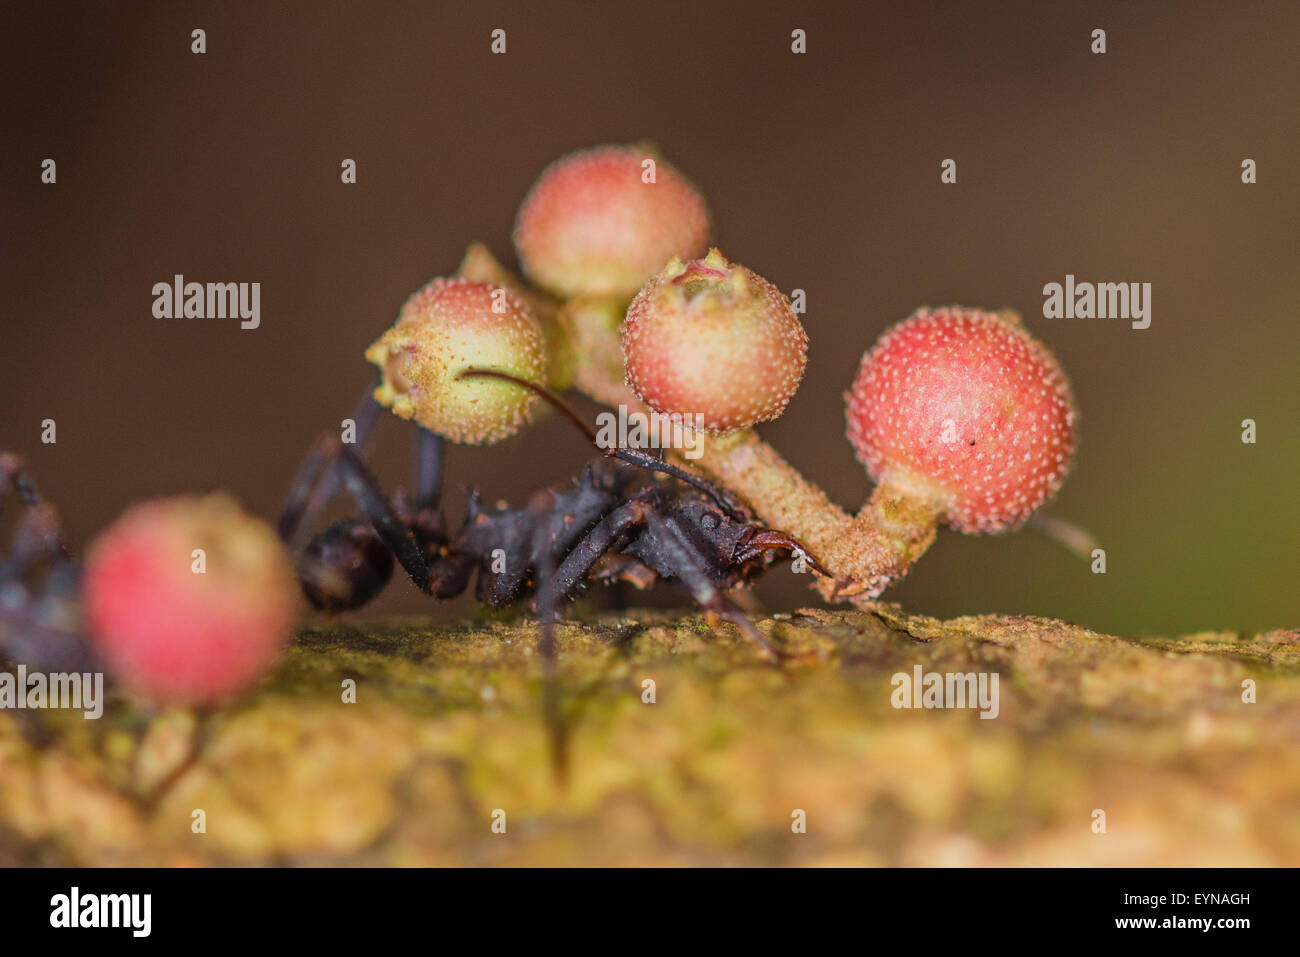 A Leaf-cutter ant returning to its nest after foraging Stock Photo